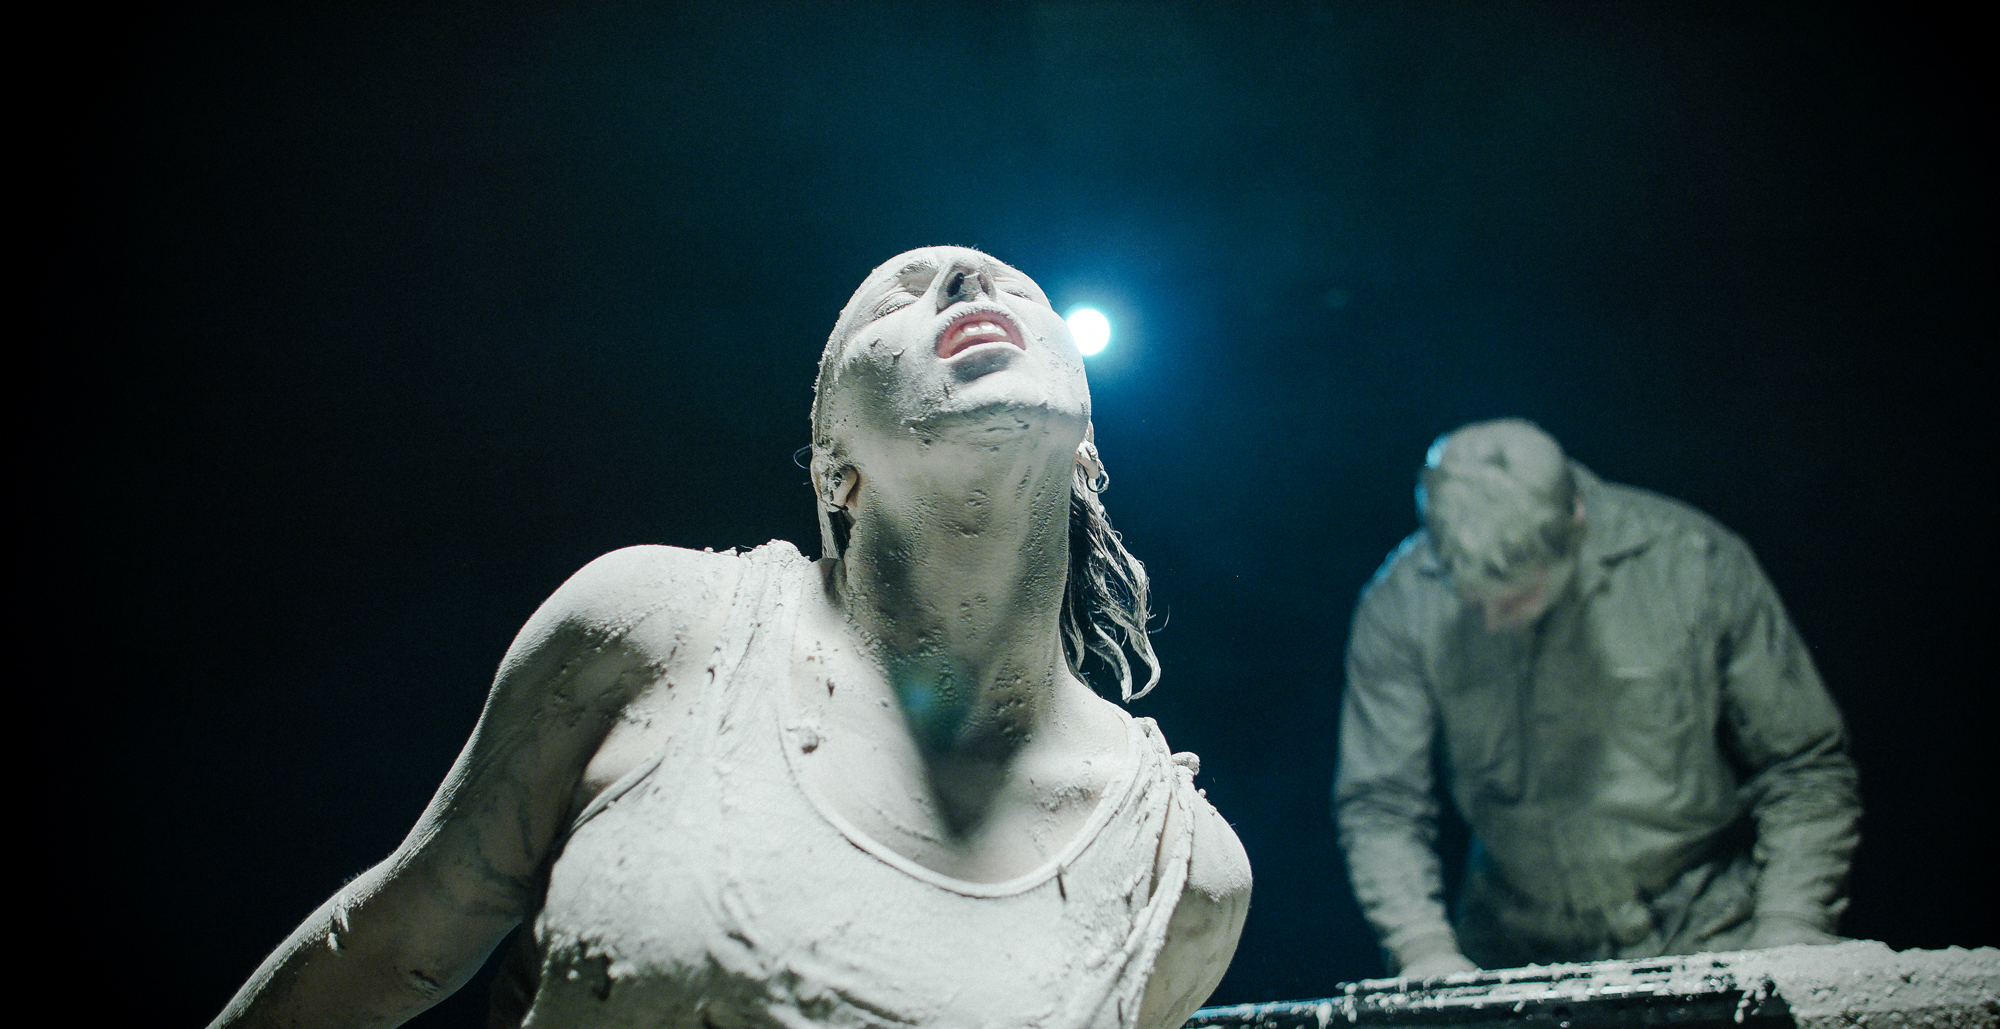 Man and woman covered in clay plays keyboards and dances in dark room lit from above.